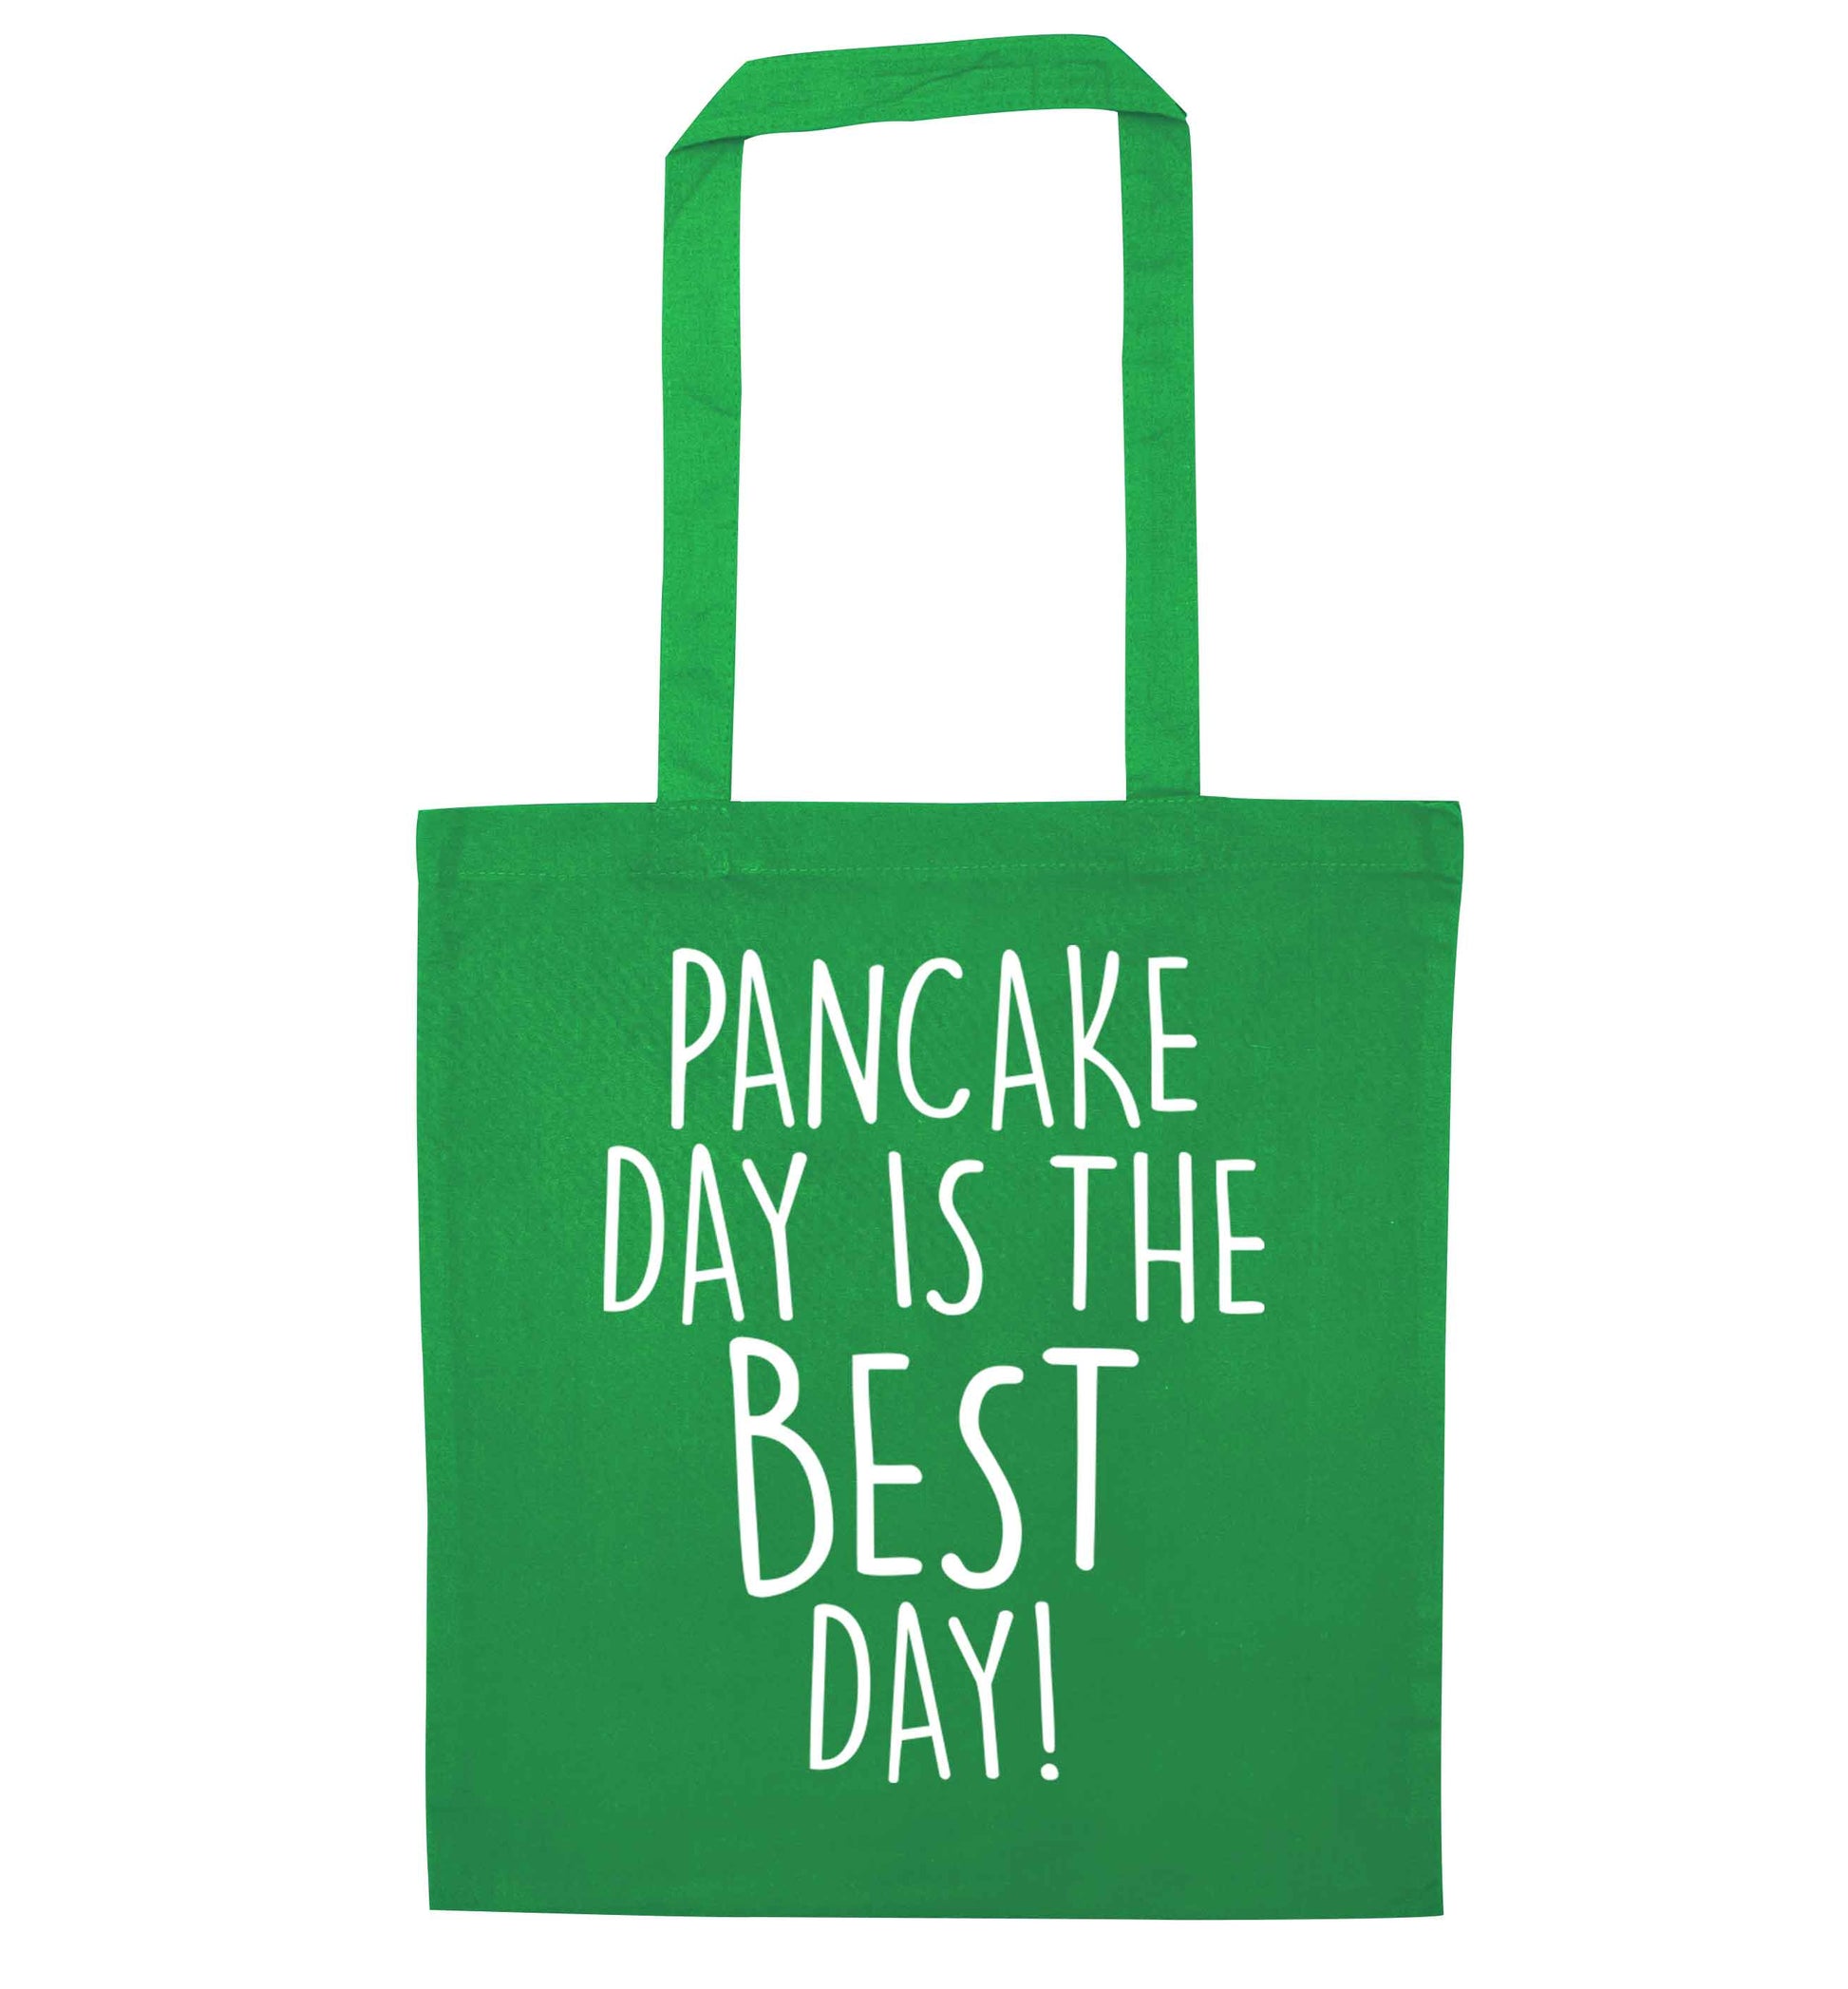 Pancake day is the best day green tote bag